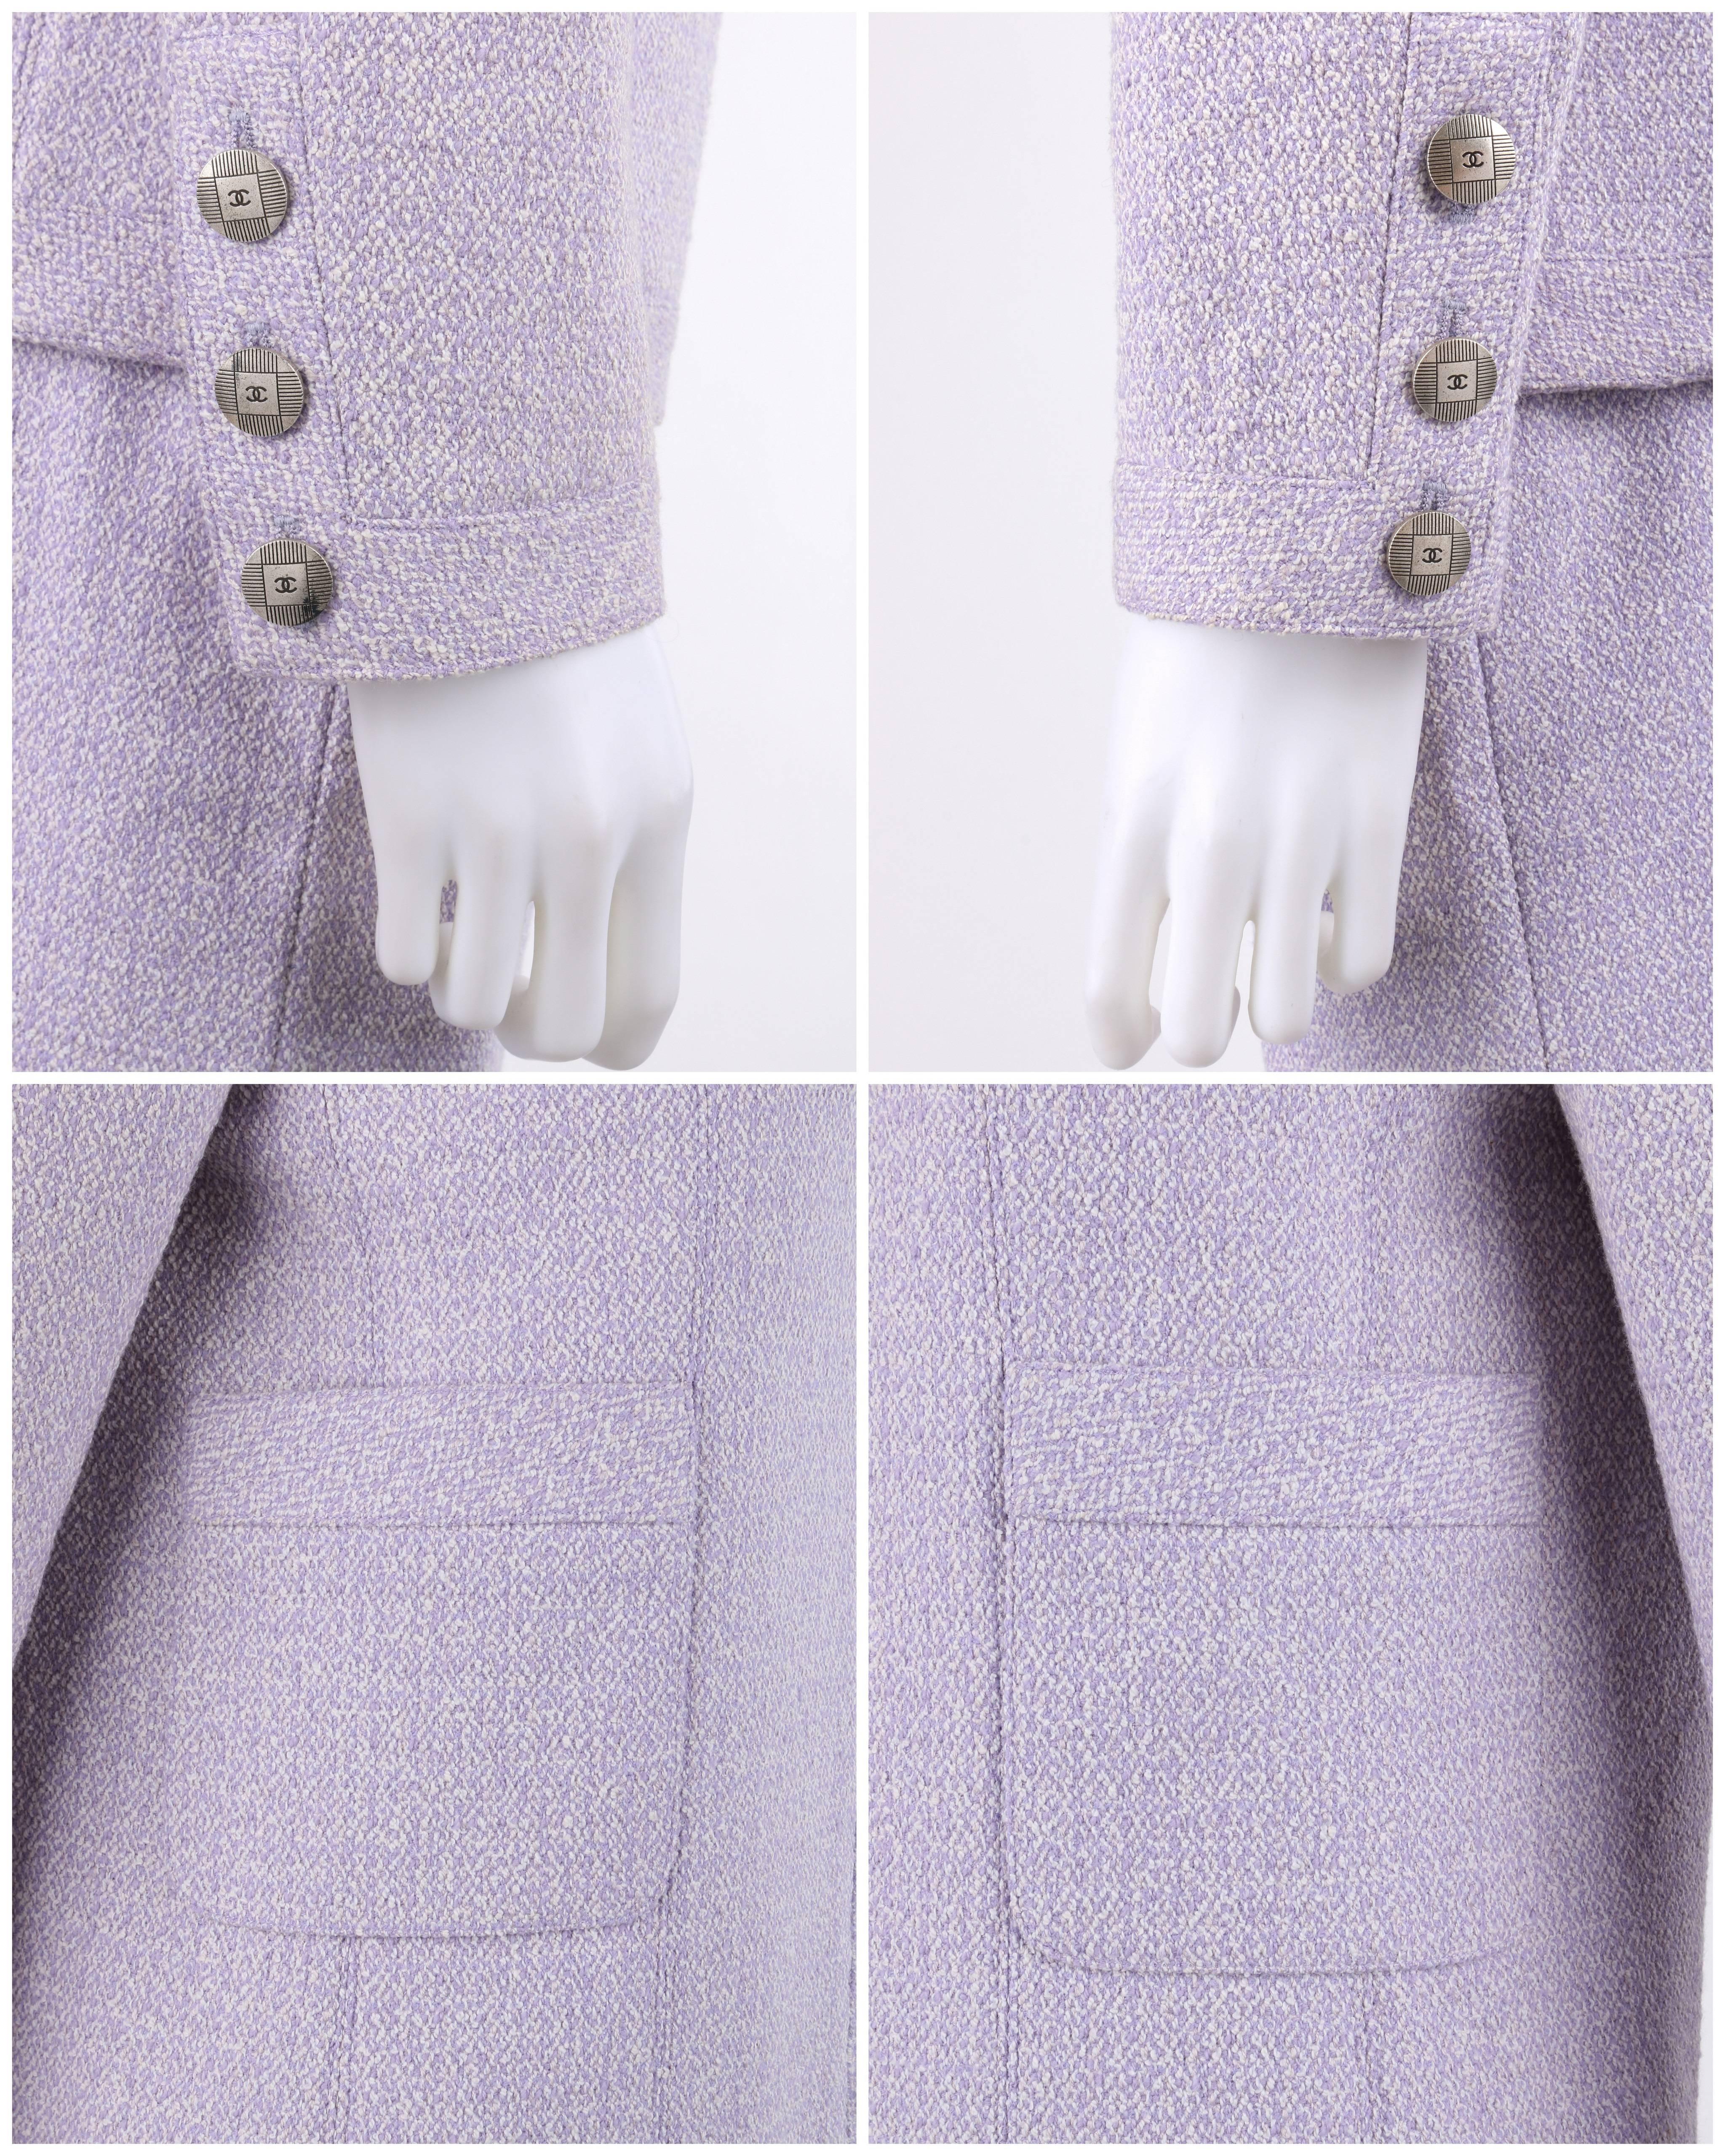 Women's CHANEL S/S 1998 2 Pc Classic Lilac & White Wool Tweed Suit Blazer Skirt Set 40